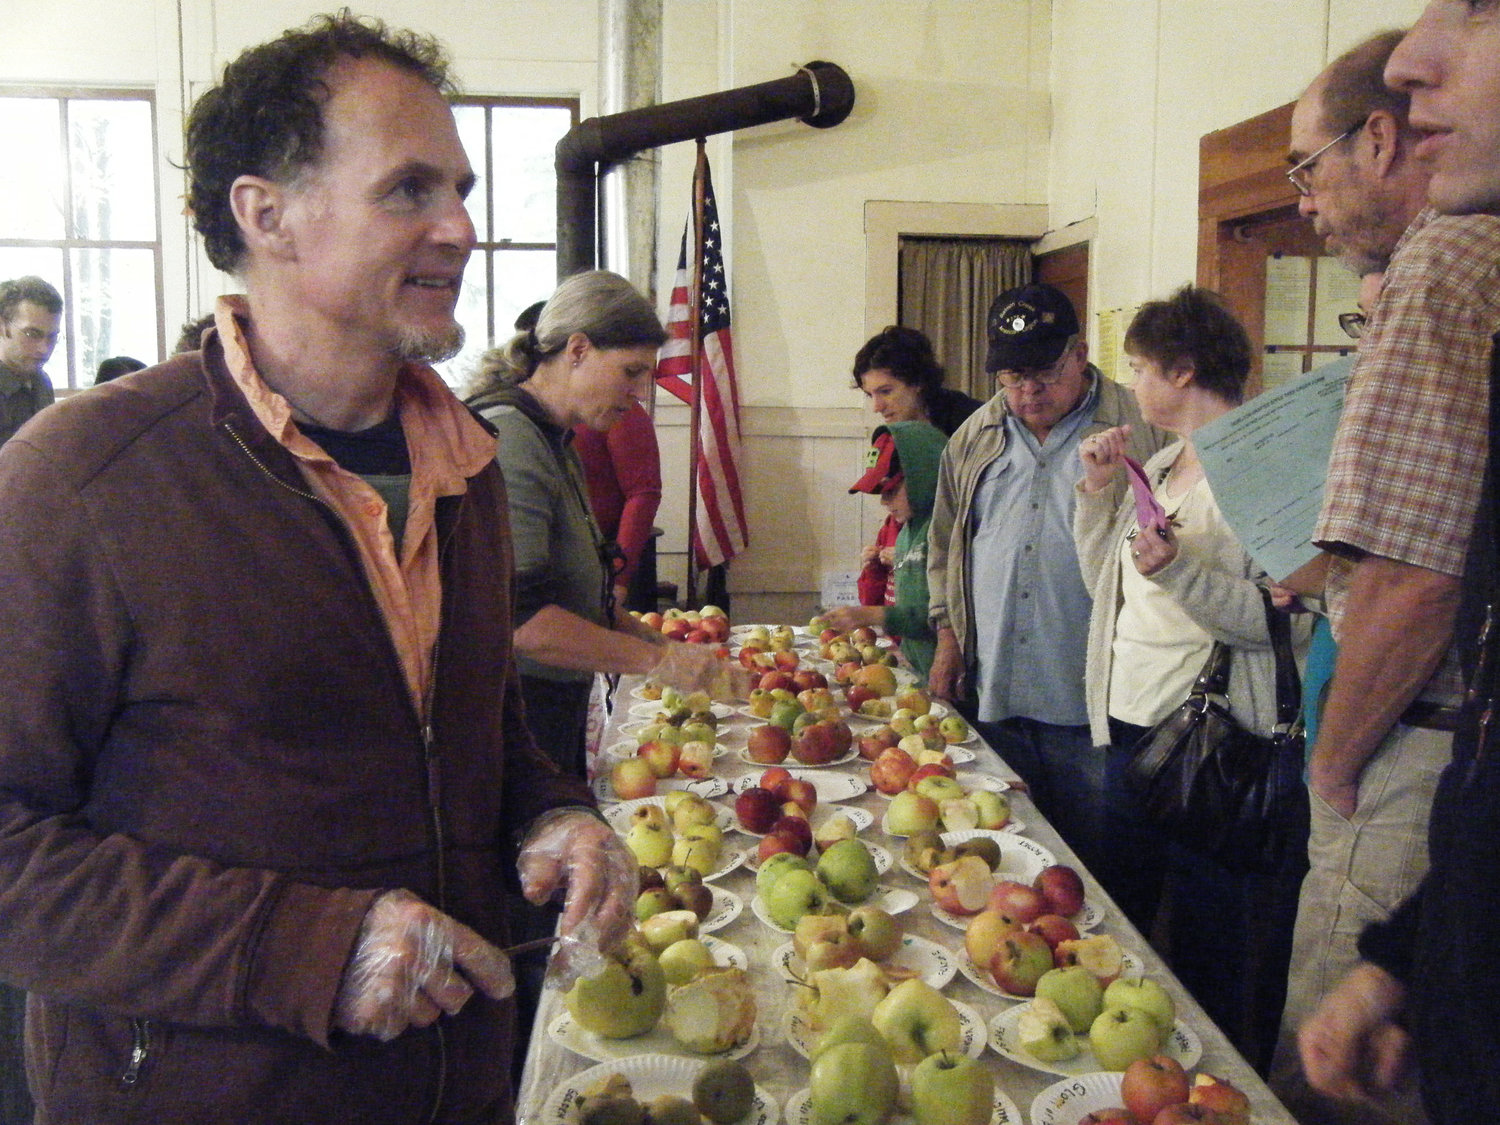 TAGGART SIEGEL and Leah Hansen slice up apples for folks at the Heirloom Apple Festival for tastings. The Heirloom Apple Festival features more than 200 different kinds of apples that attendees can taste. All of the apples taste different – some sweet, tart or juicy.